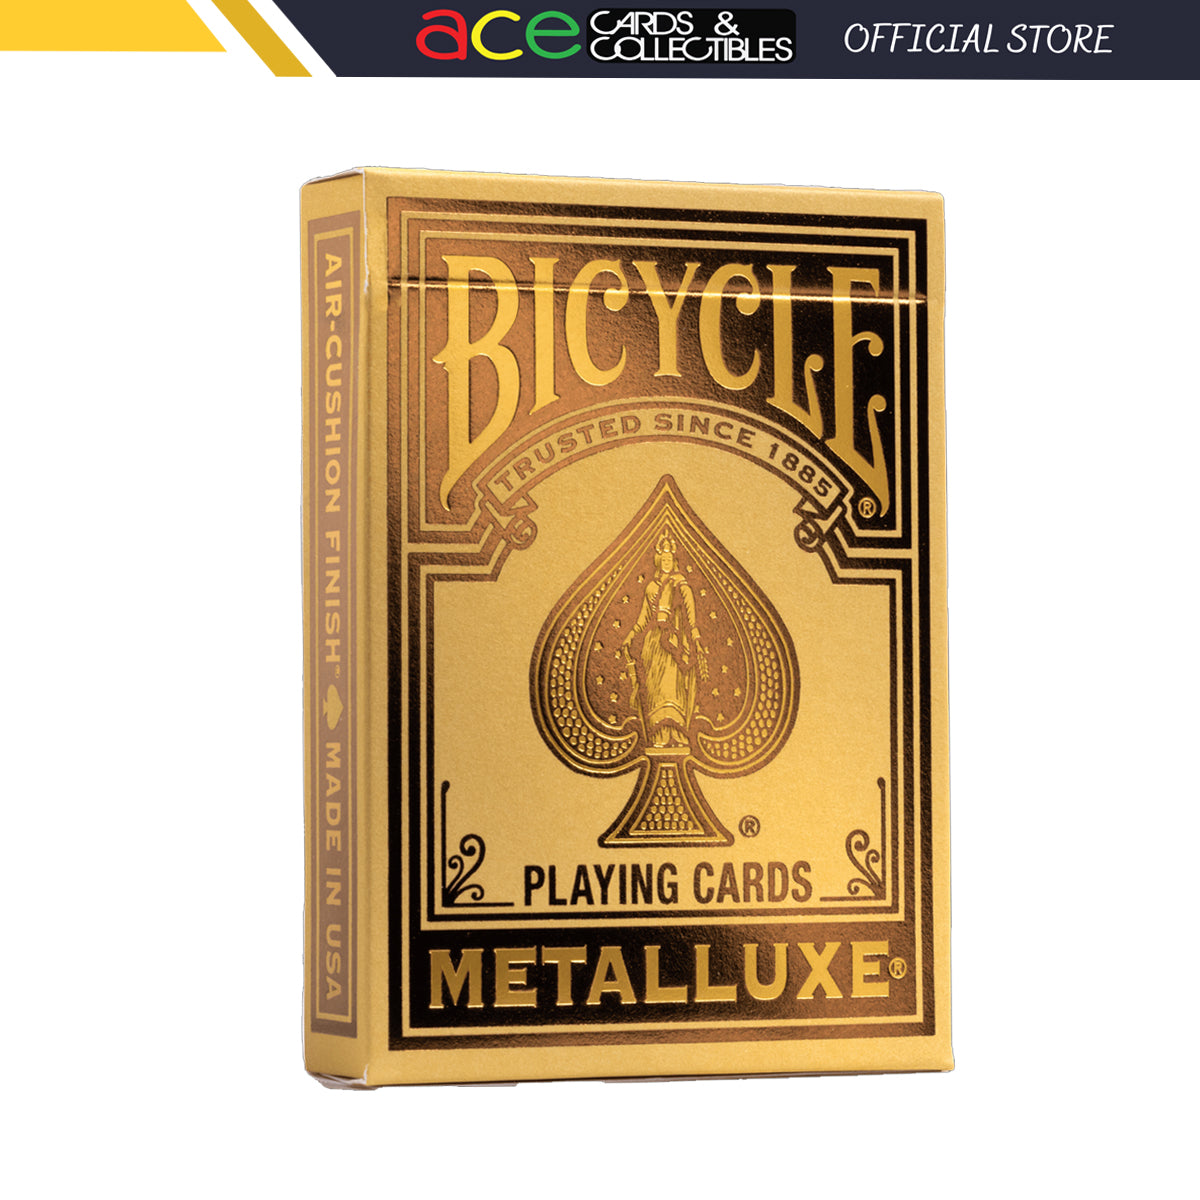 Bicycle Metalluxe Gold Playing Cards-United States Playing Cards Company-Ace Cards &amp; Collectibles